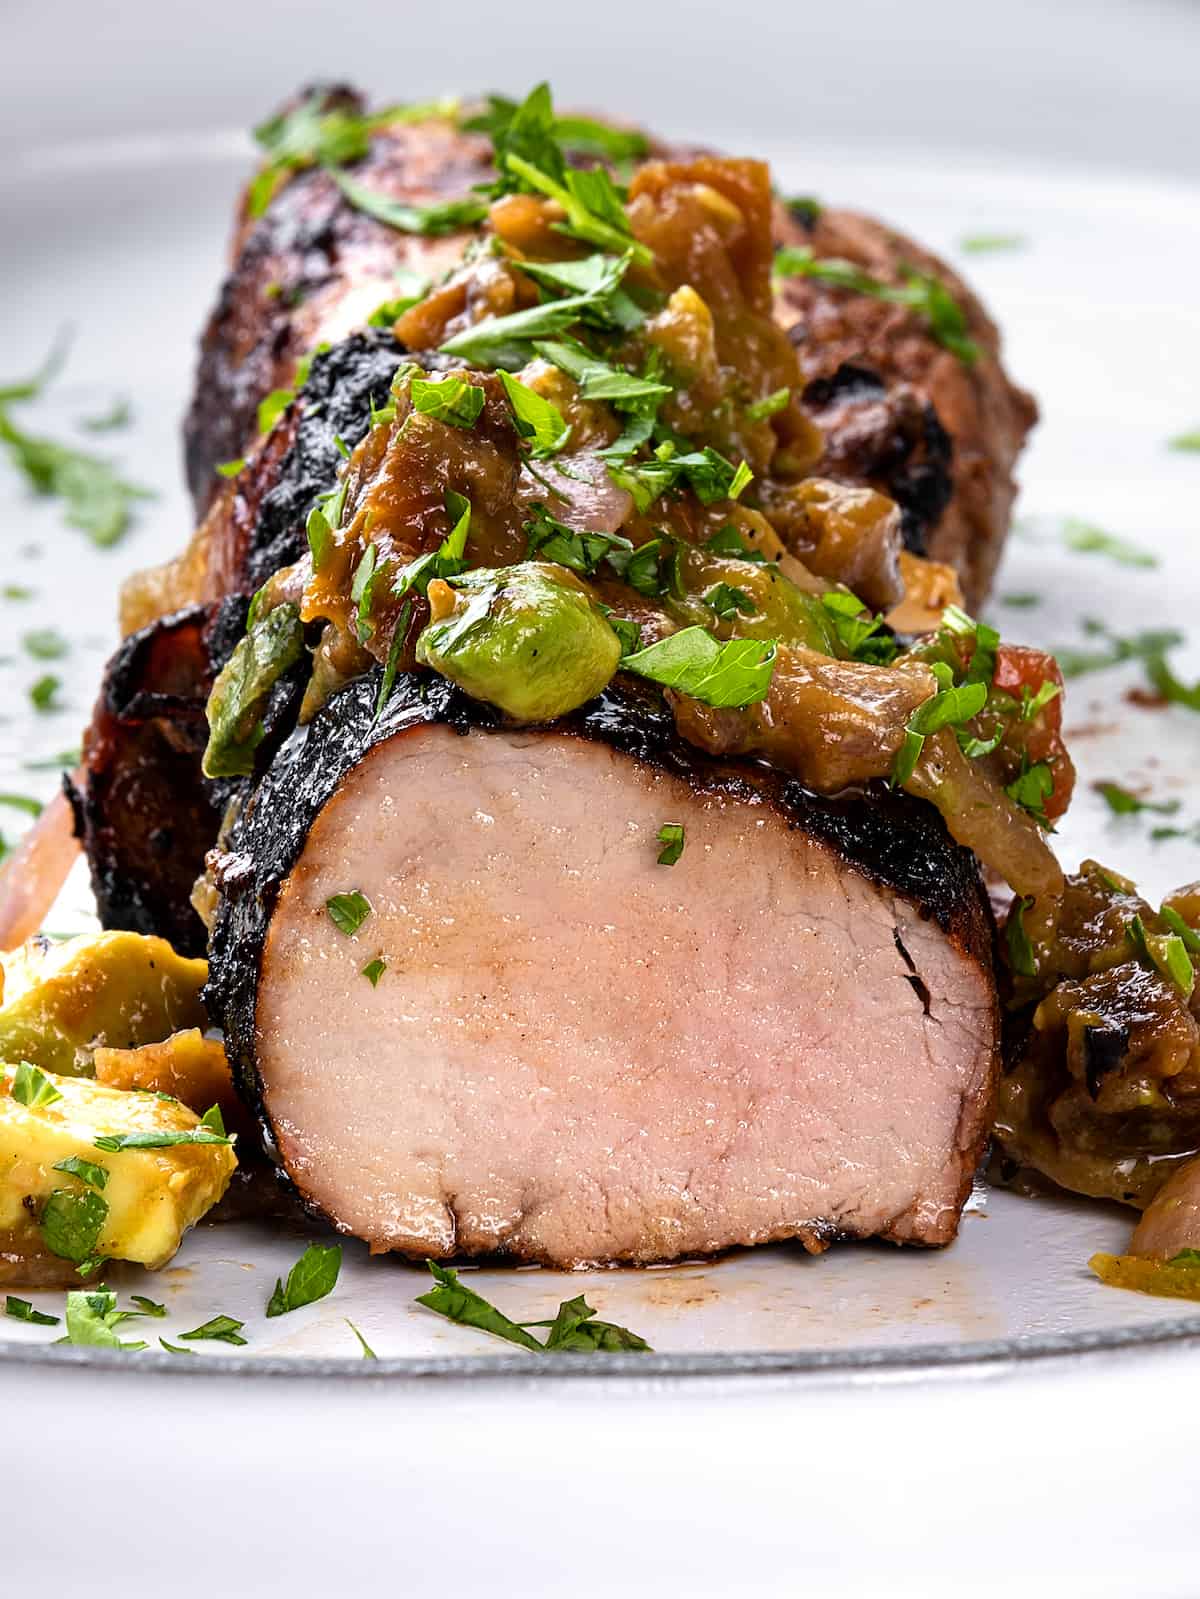 Slices of grilled pork tenderloin on a plate with avocado salsa on top of the pork